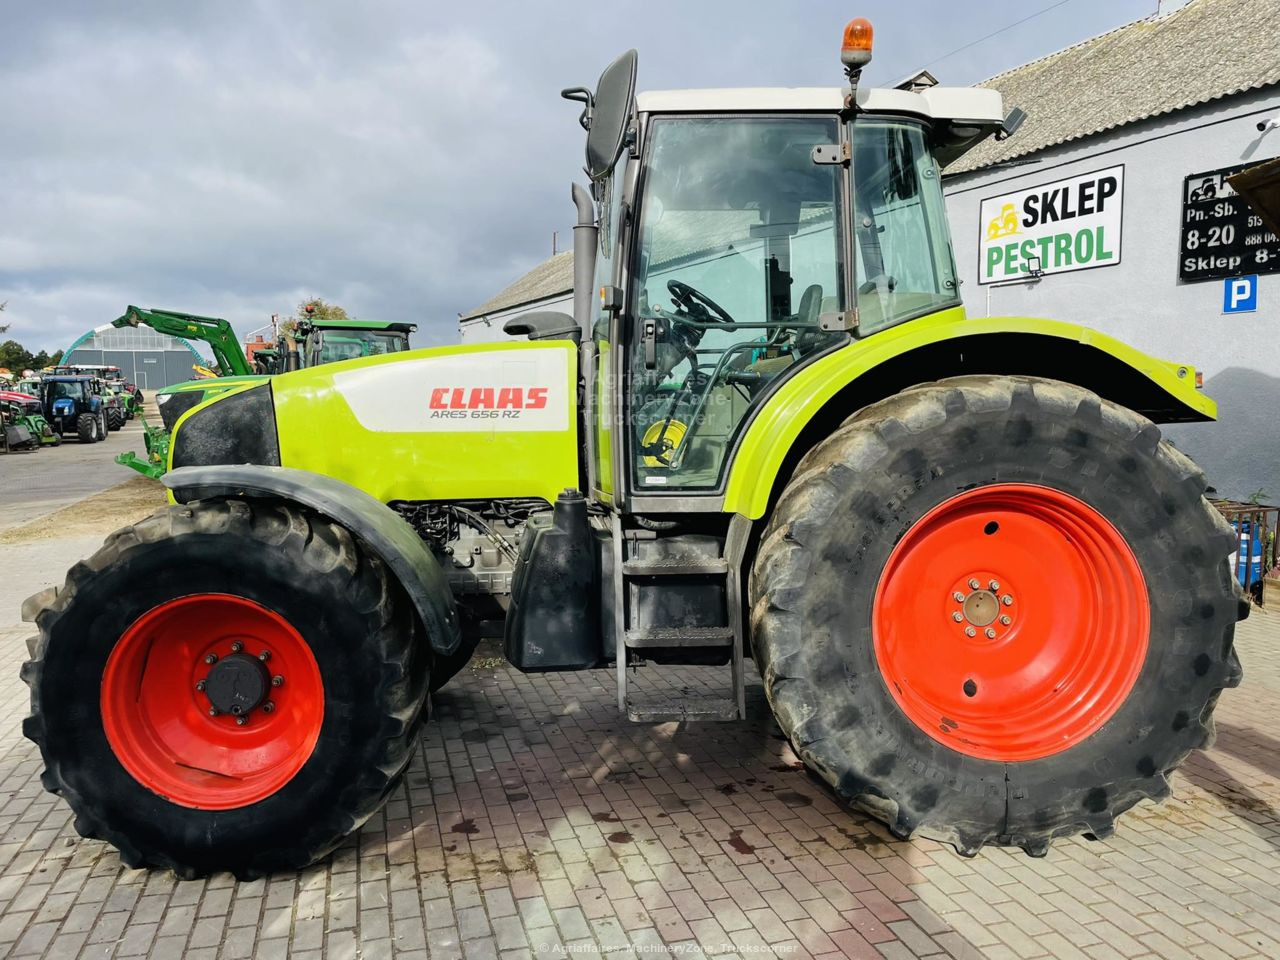 Tractor Claas ARES 656 RZ